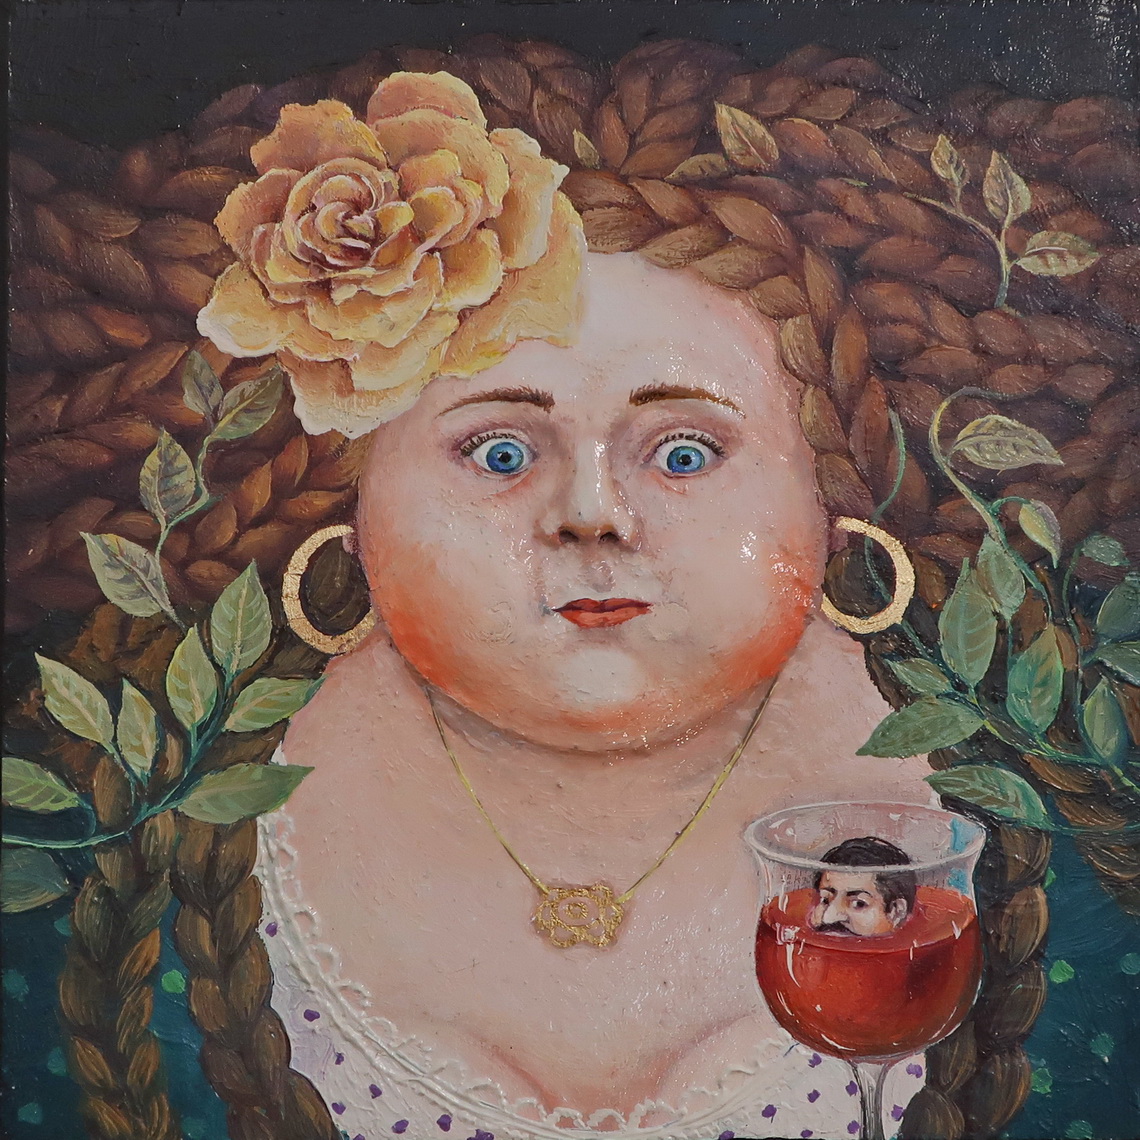 Lady with a glass where a man swims in red wine (Gallery No 27 Pintada street in Nerja which shows paintings and other works of Francisco Martin)